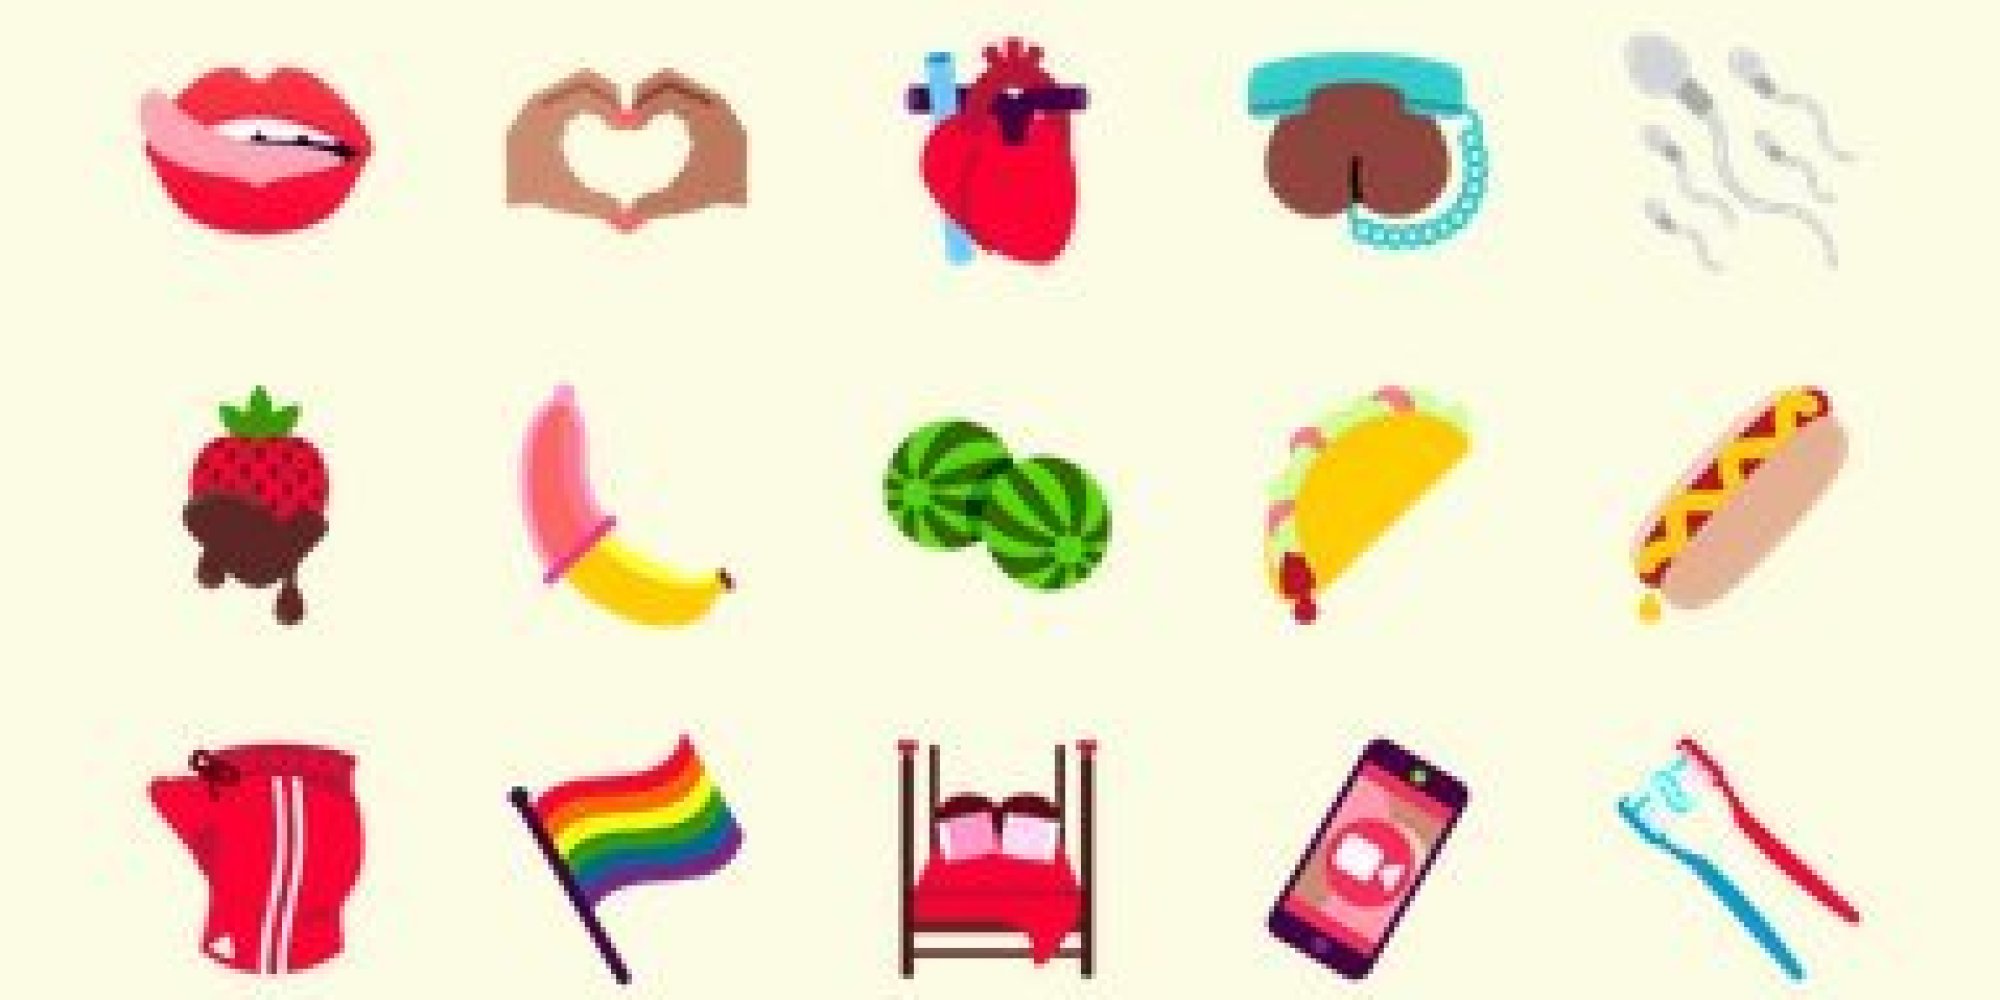 Flirtmoji The Emoji Site For All Your Sexting Needs But Its A Bit Nsfw Huffpost Uk 3687